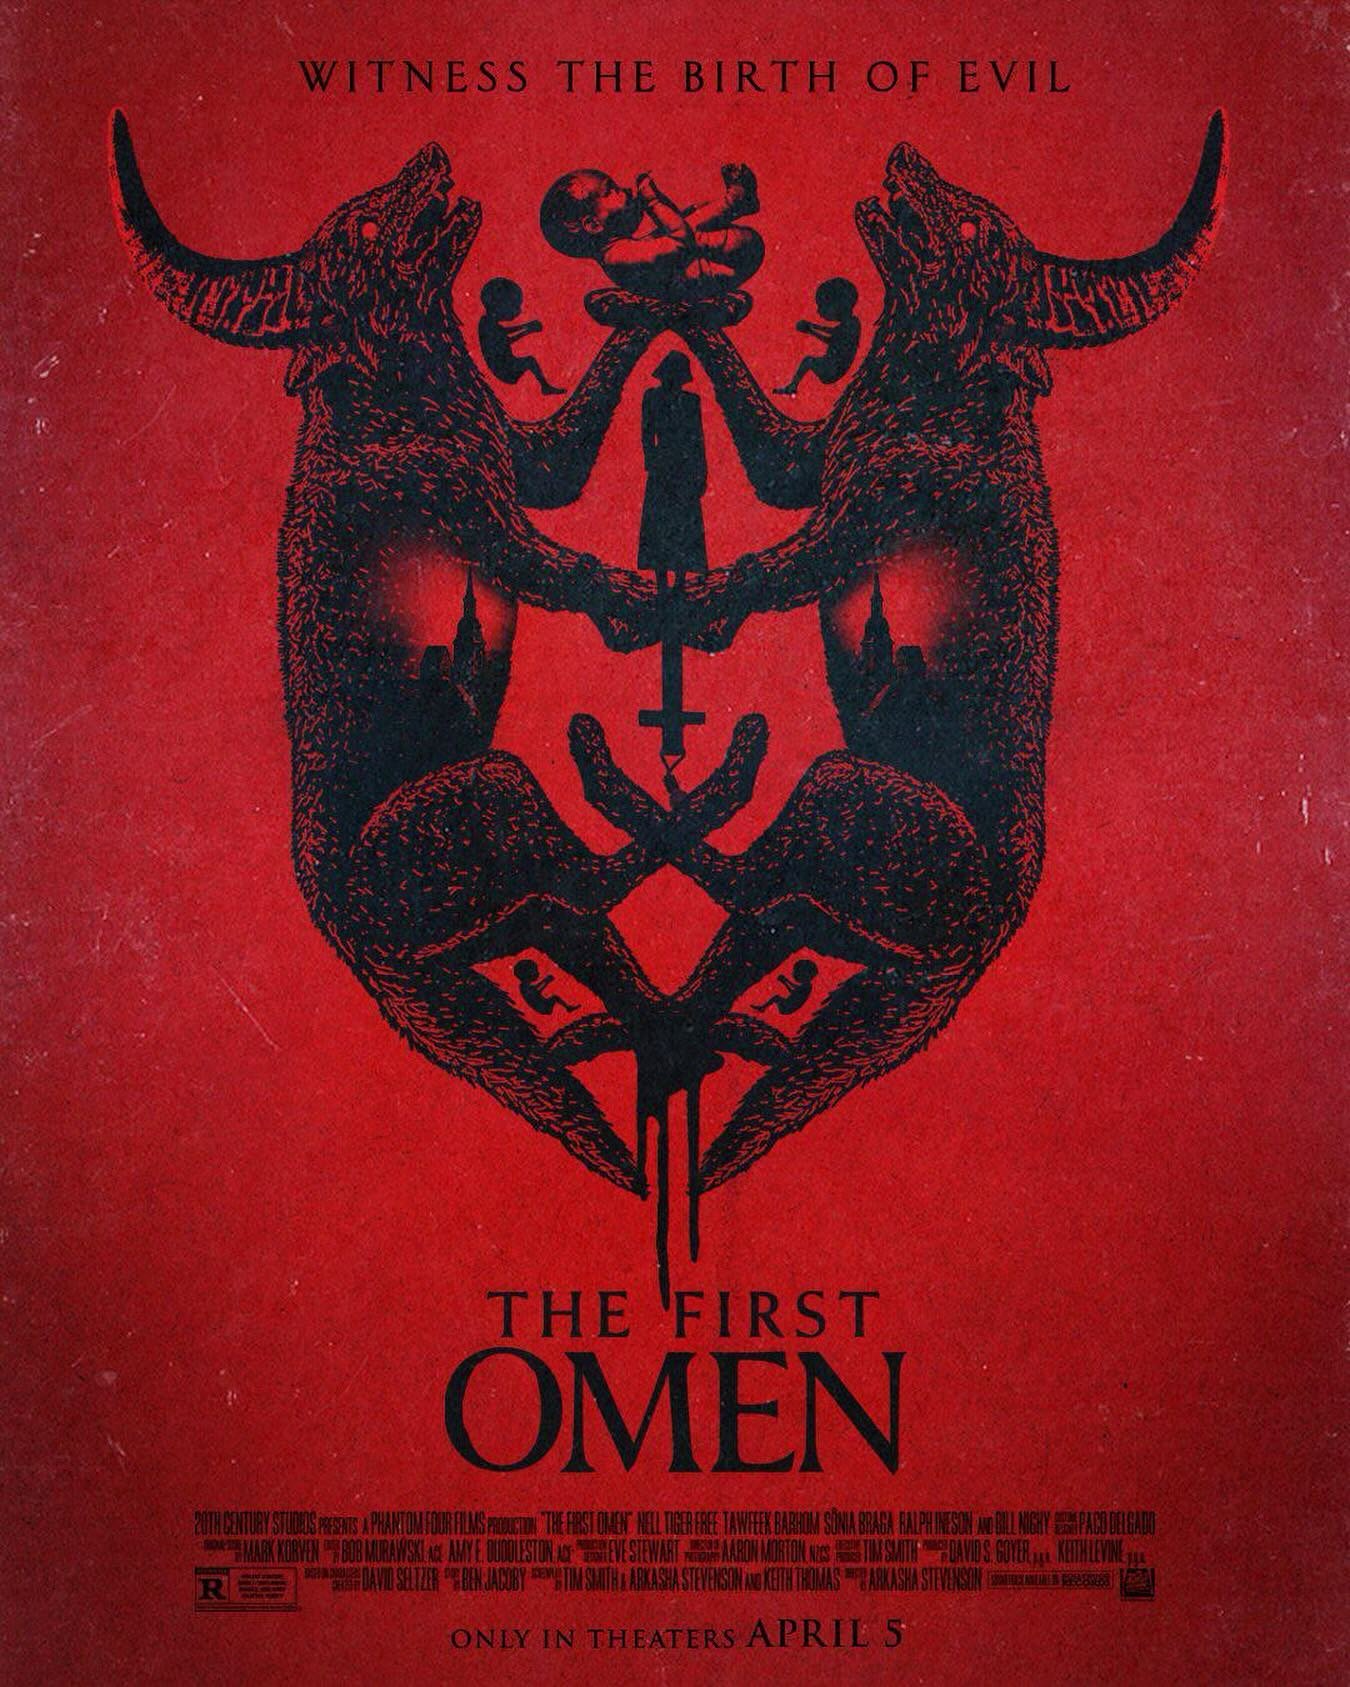 The First Omen is out today! Really enjoyed orchestrating @markkorven &lsquo;s awesomely terrifying score